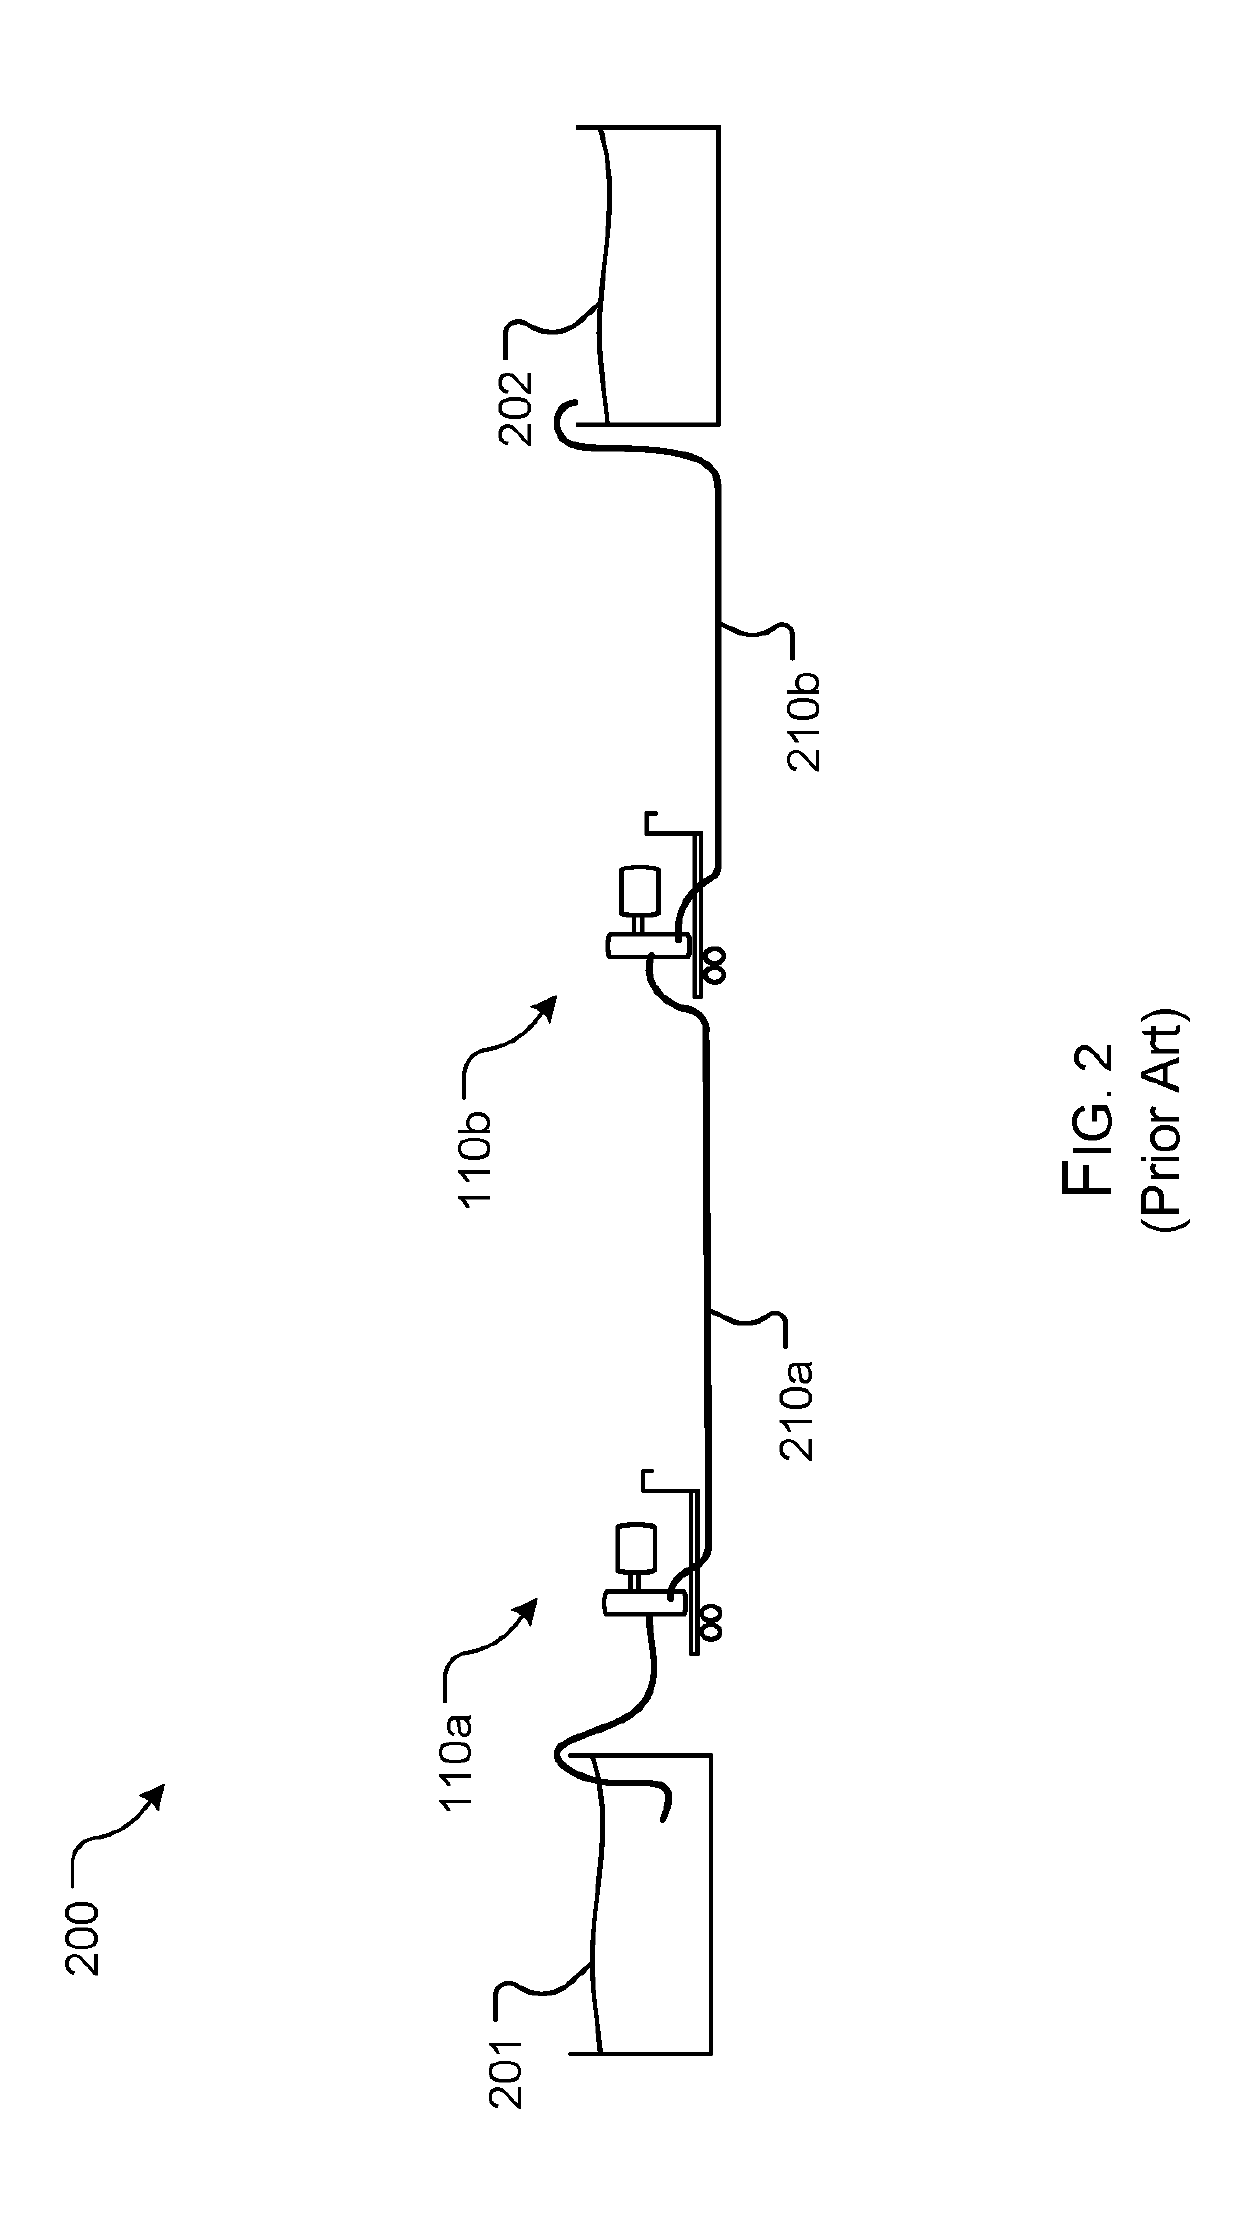 Water transfer monitoring system and method of use